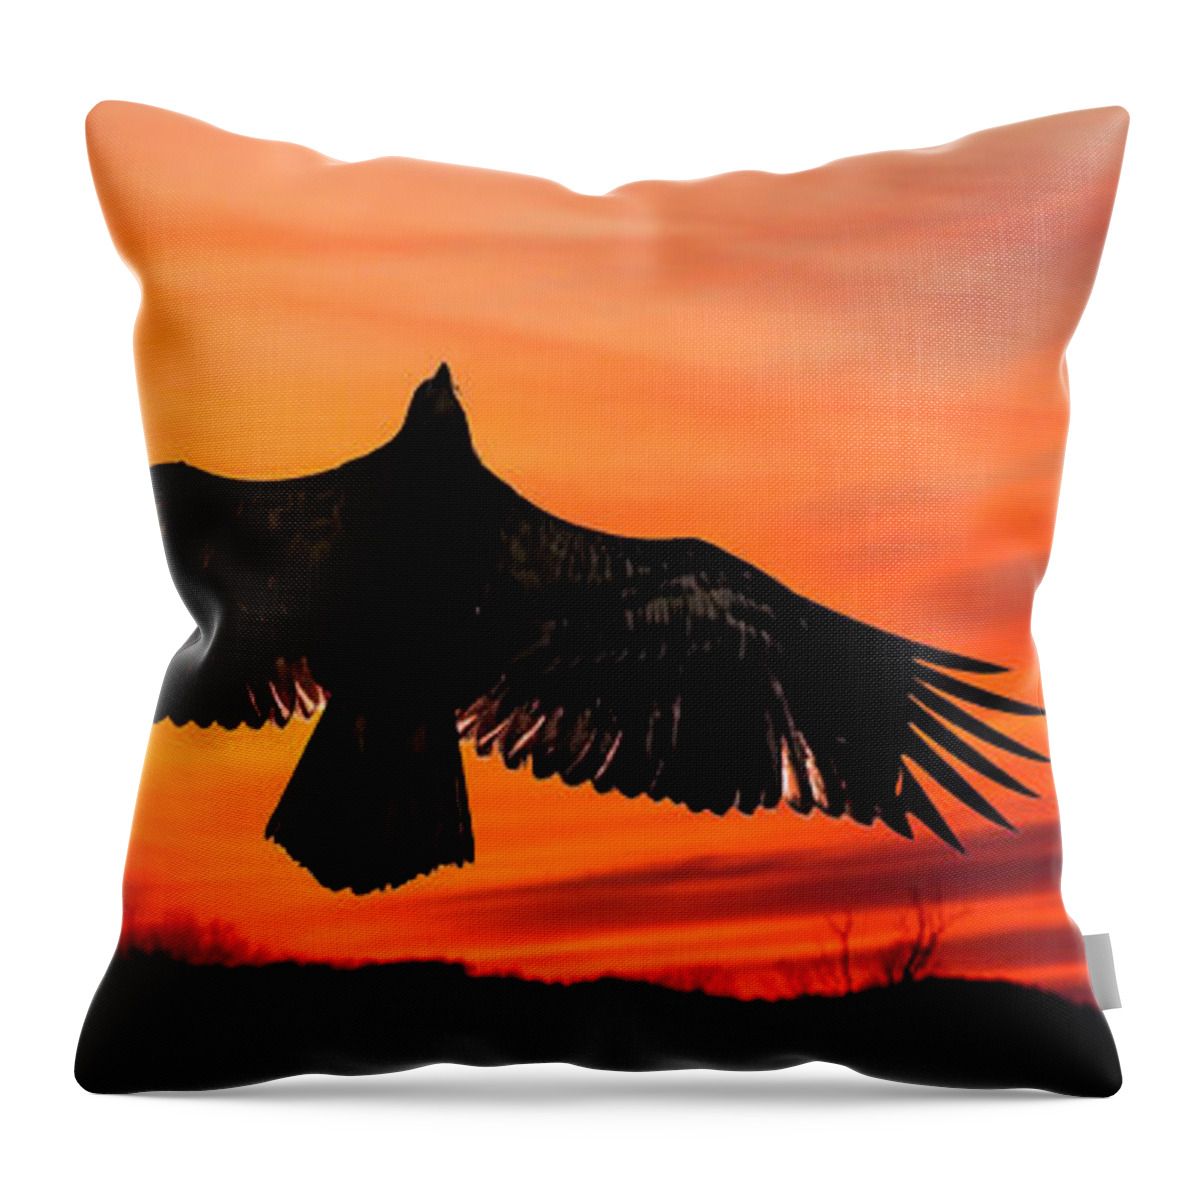 Red Sunset Throw Pillow featuring the photograph Juvenile Sunset by Randall Branham